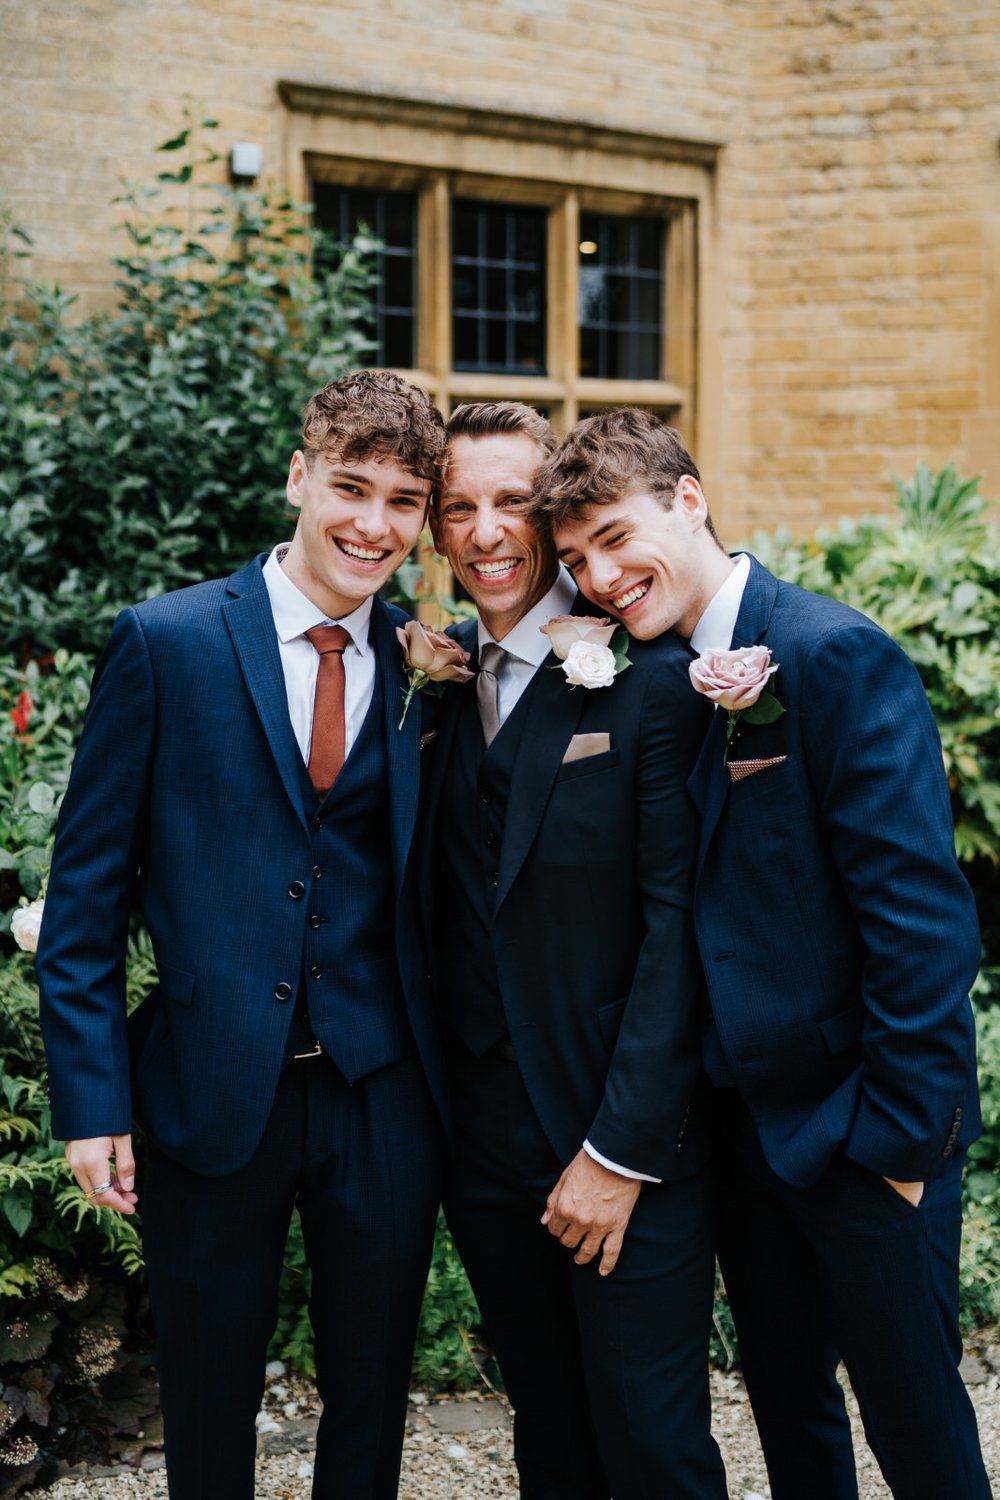 Groom poses with his two twin sons outside Foxhill Manor before departing for church wedding